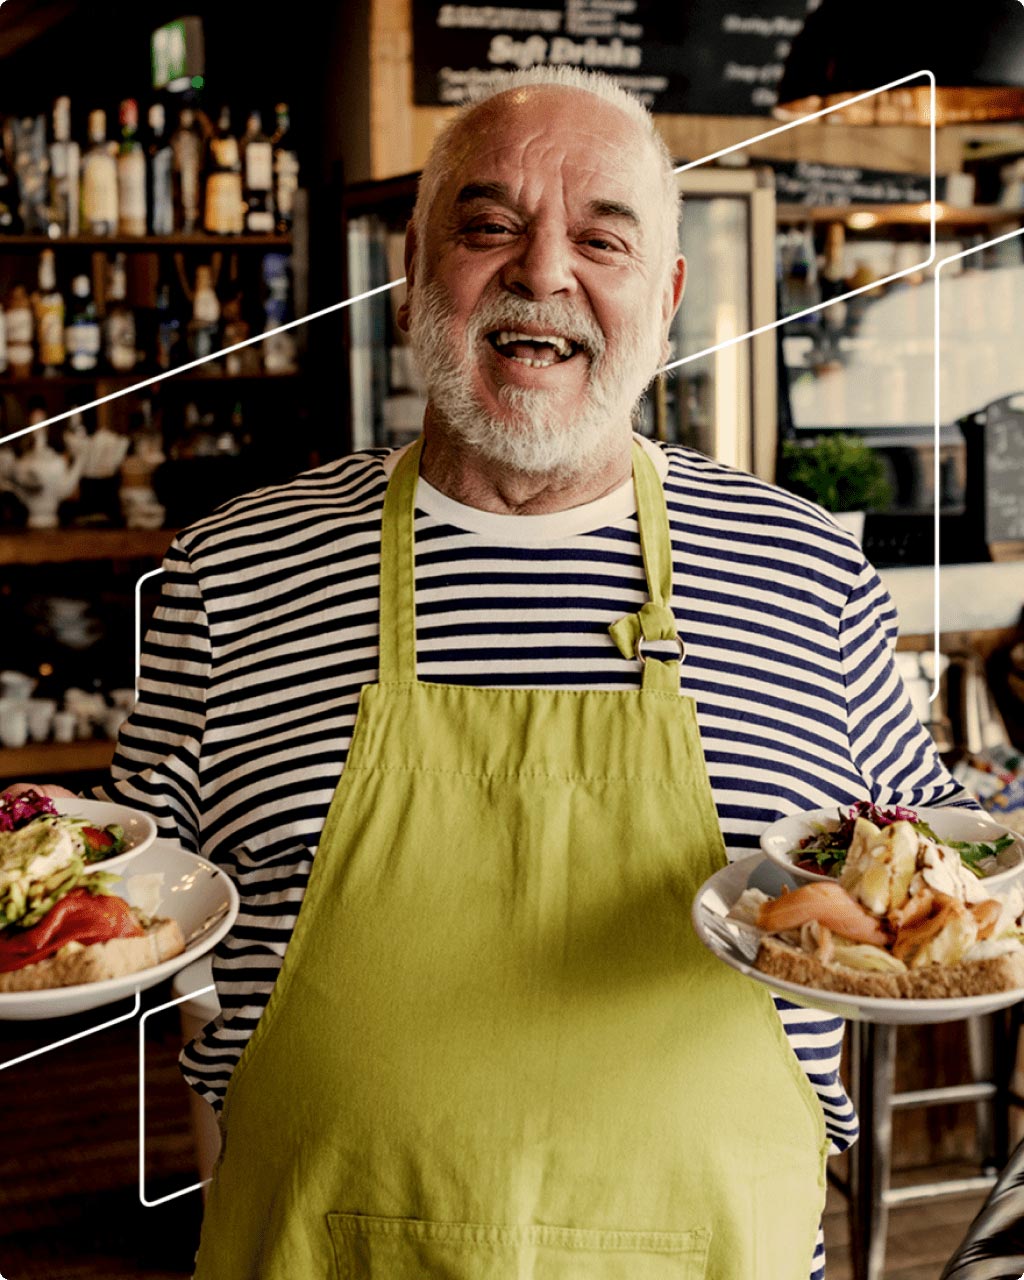 Smiling man walking with plates of food inside café